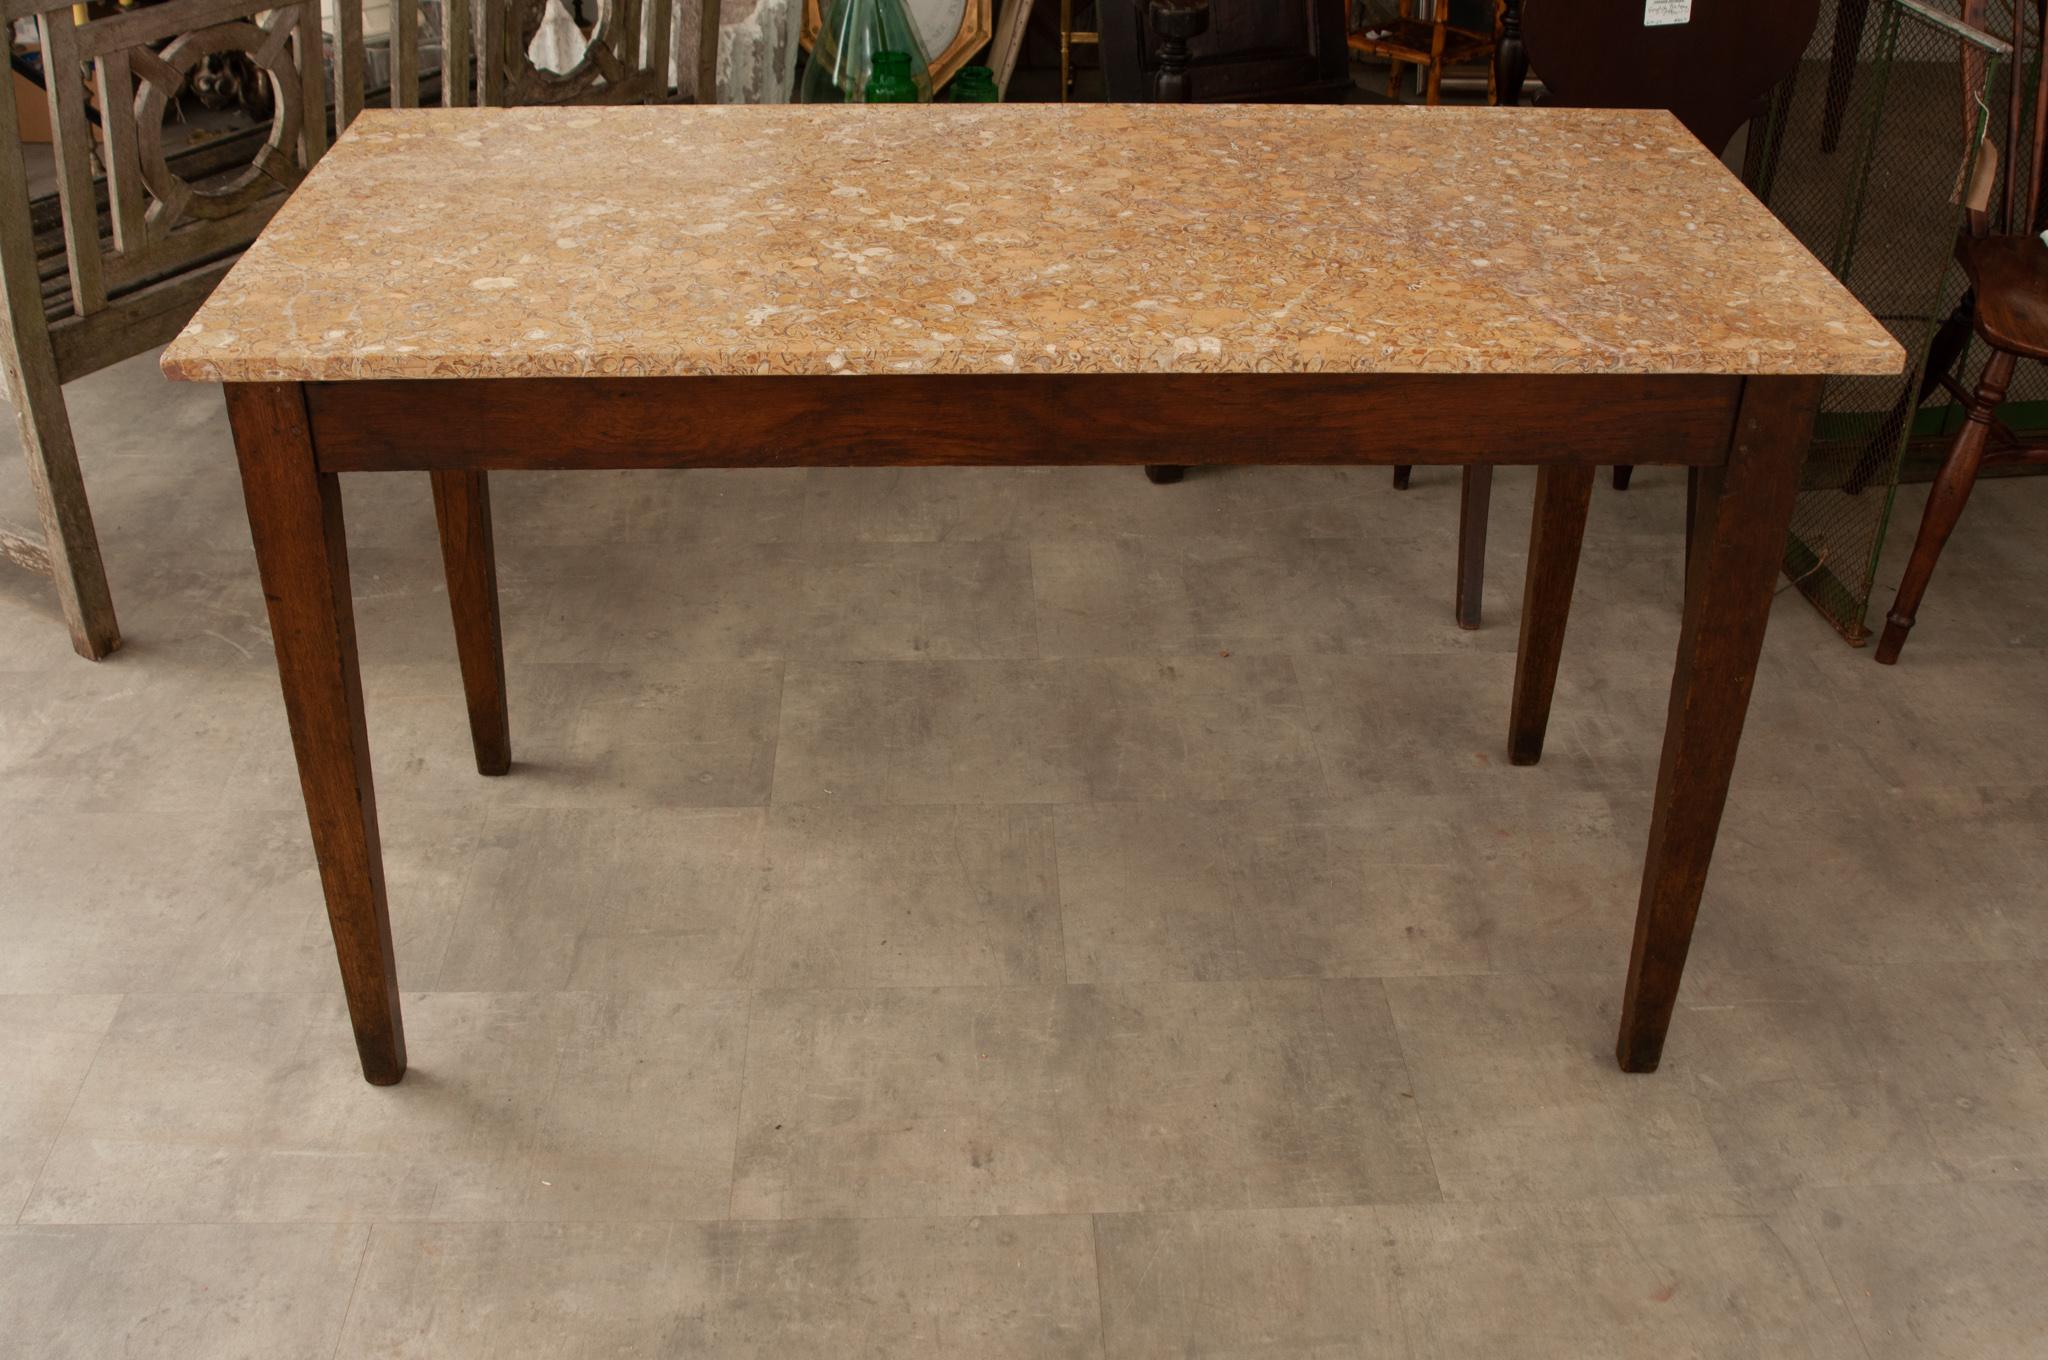 A 19th century oak cafe table crafted in France circa 1870 with a fantastic patterned stone top over a richly patinated solid oak base with tapered square legs. Its spare design makes it very versatile. This piece would work beautifully in a kitchen